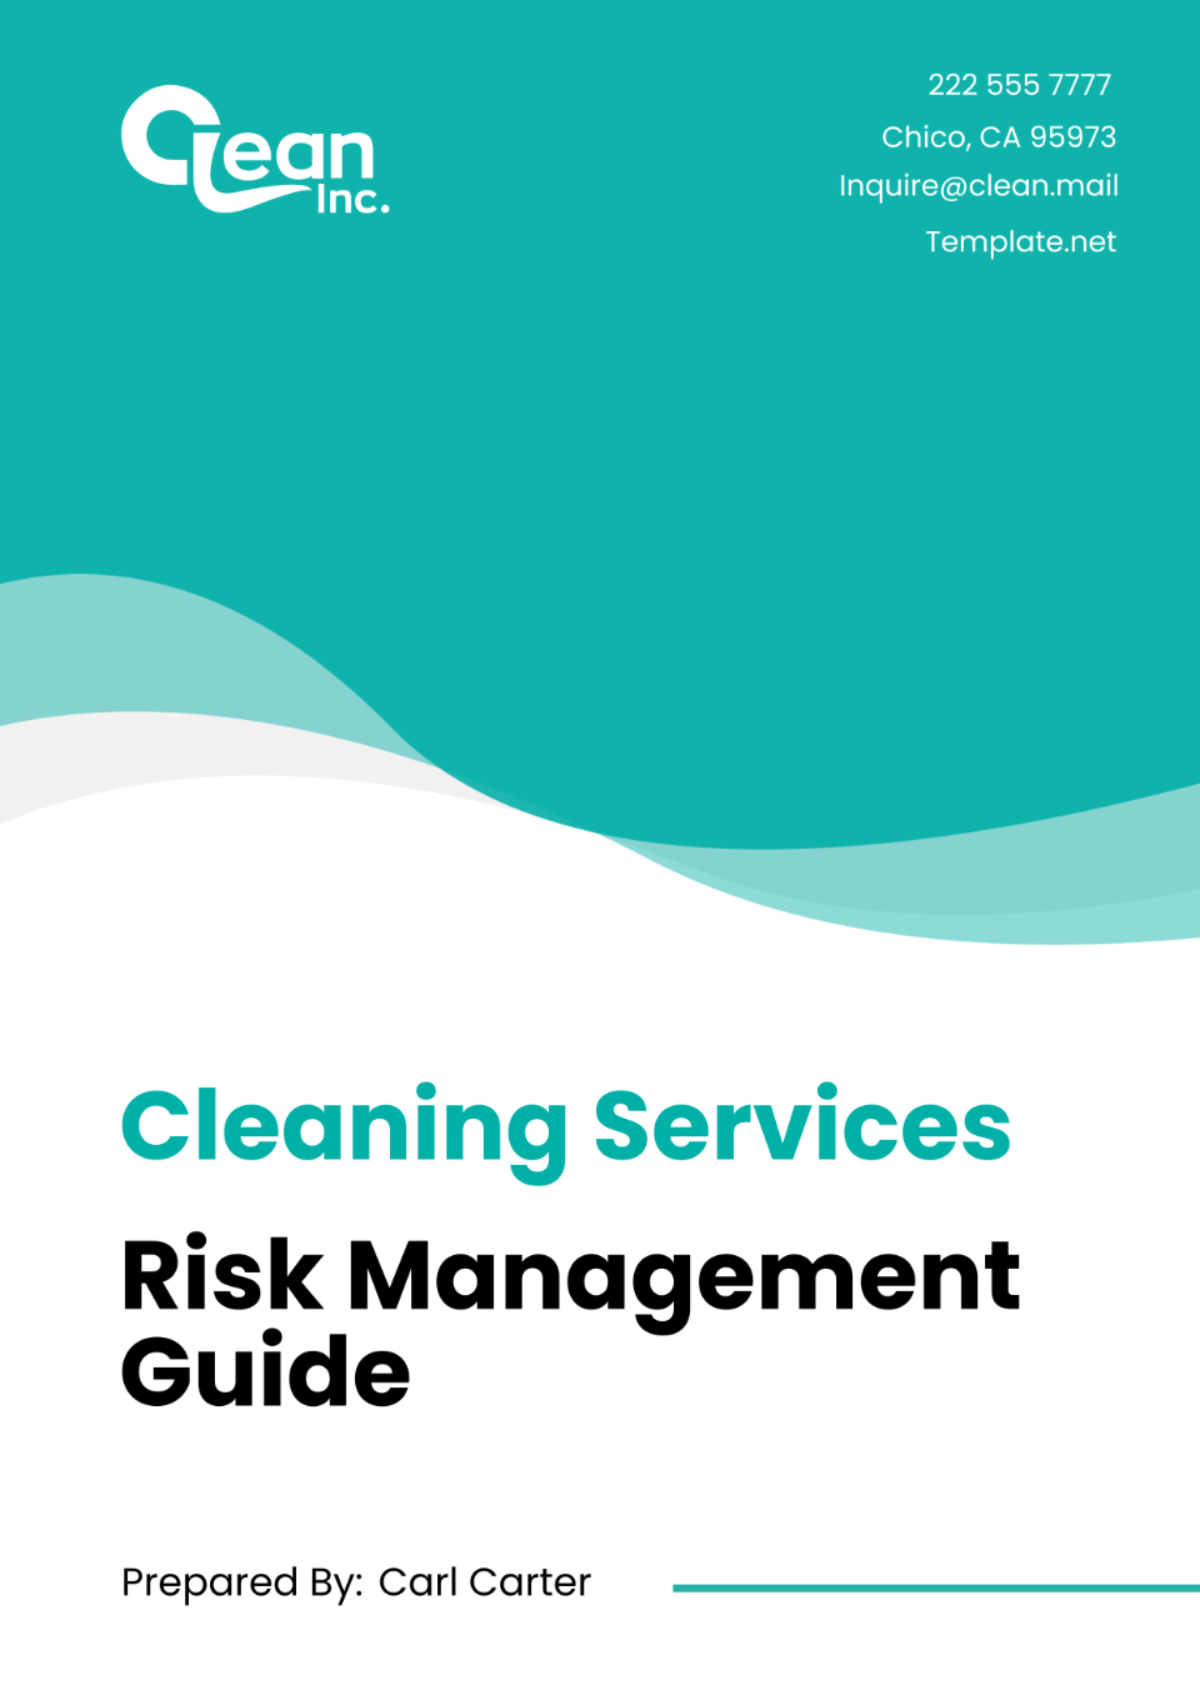 Cleaning Services Risk Management Guide Template